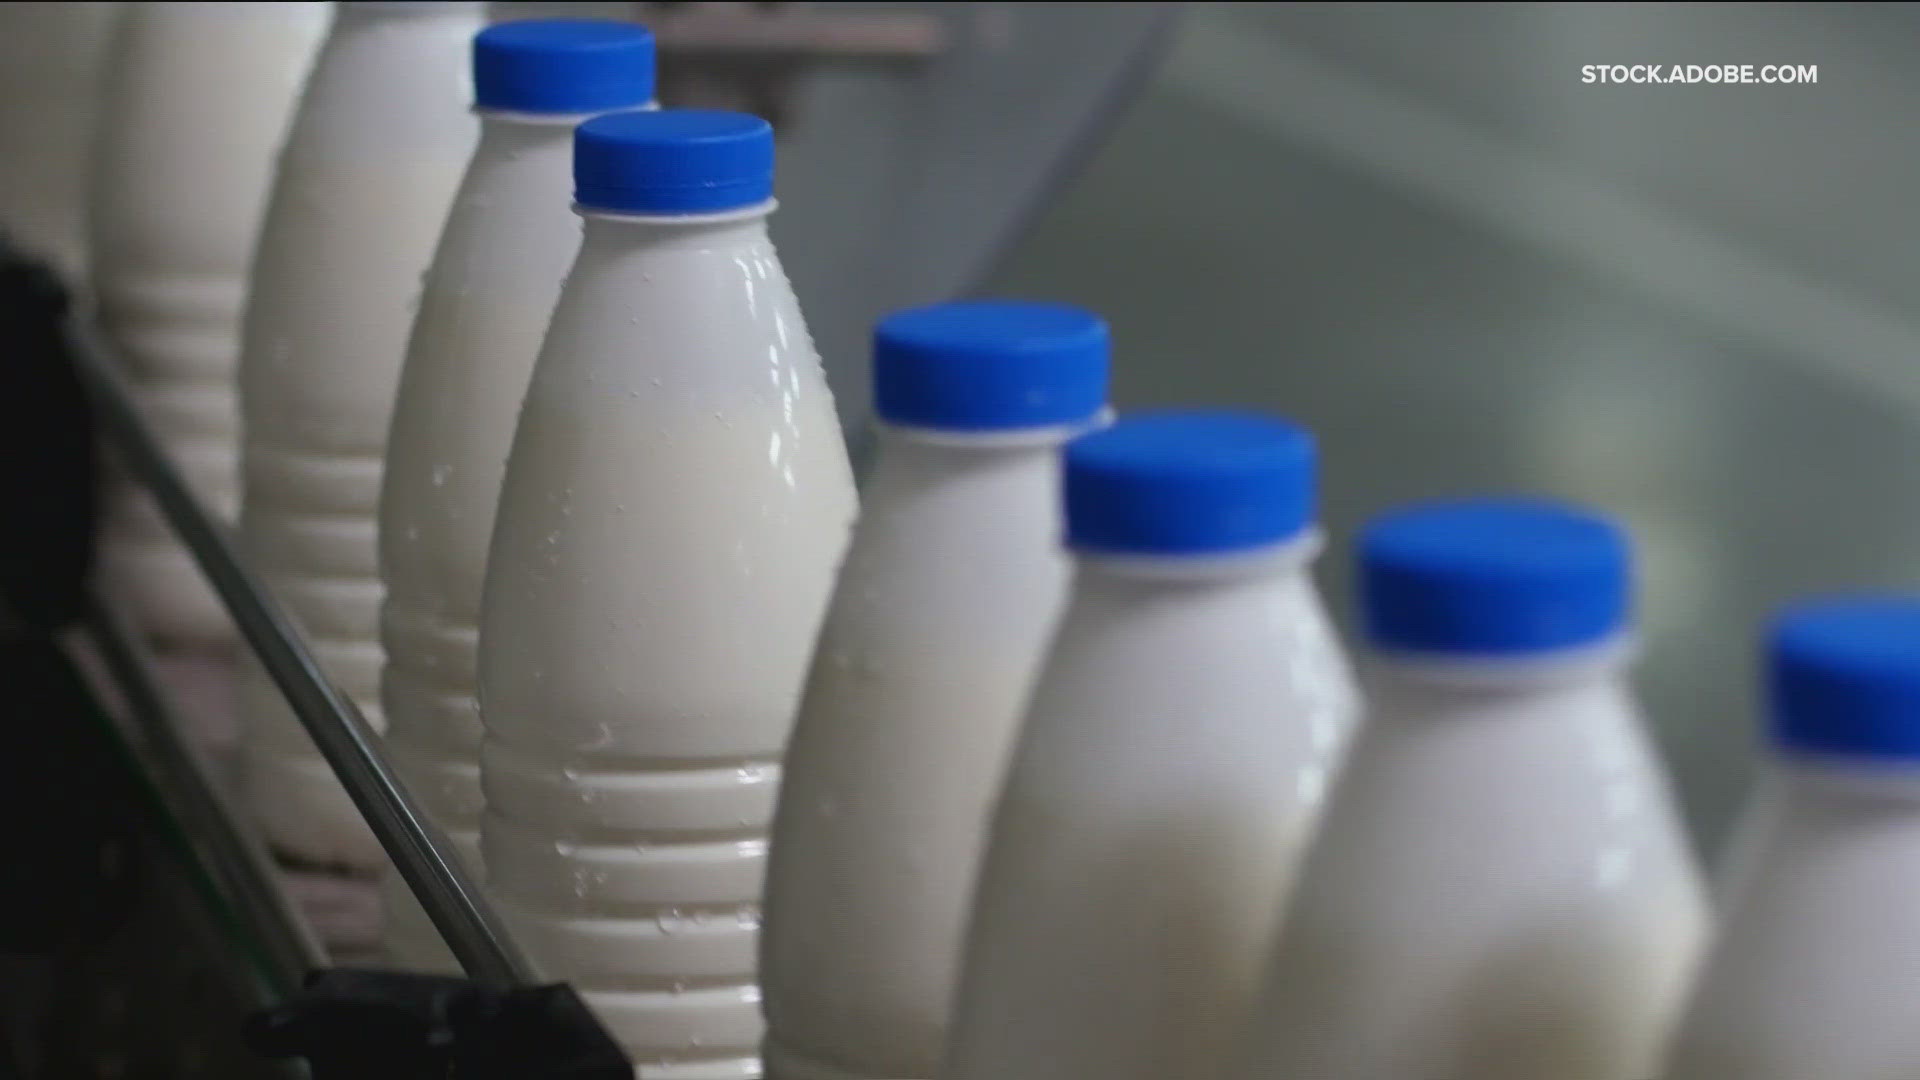 Some milk samples reportedly tested positive for avian flu remnants.